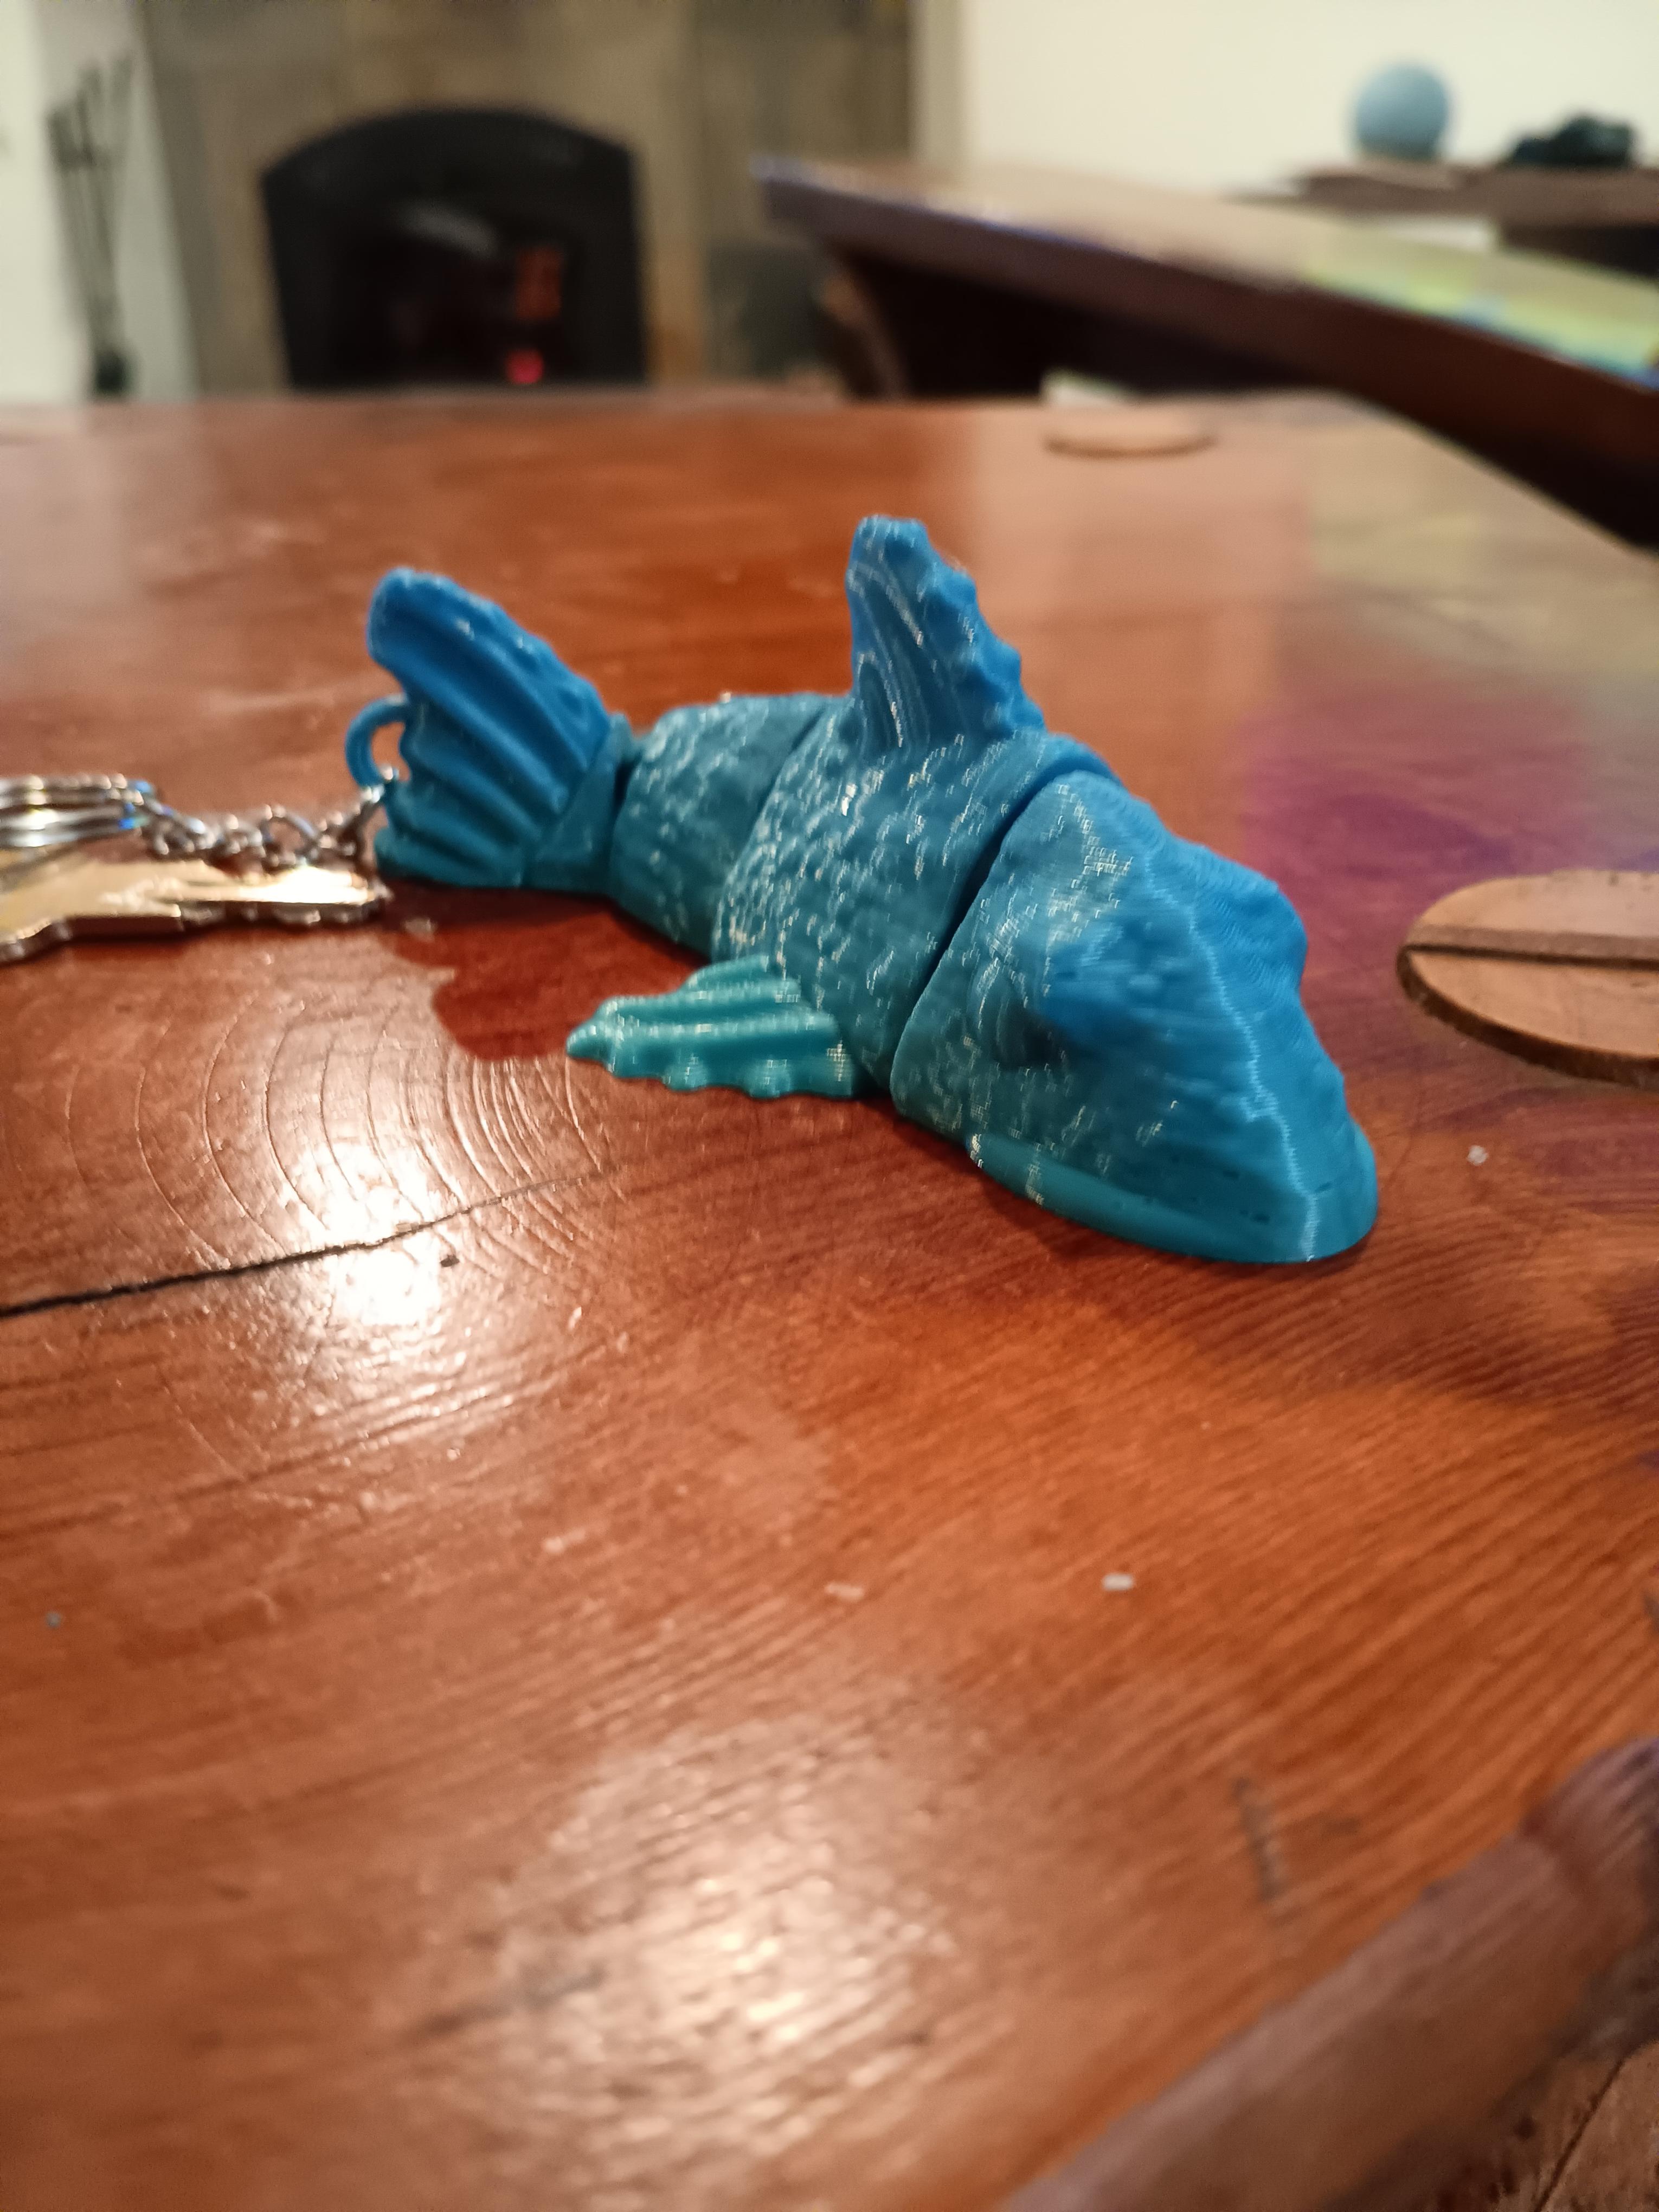 Flexi Koi Fish Keychain - print in place - articulated - fidget toy 3d model